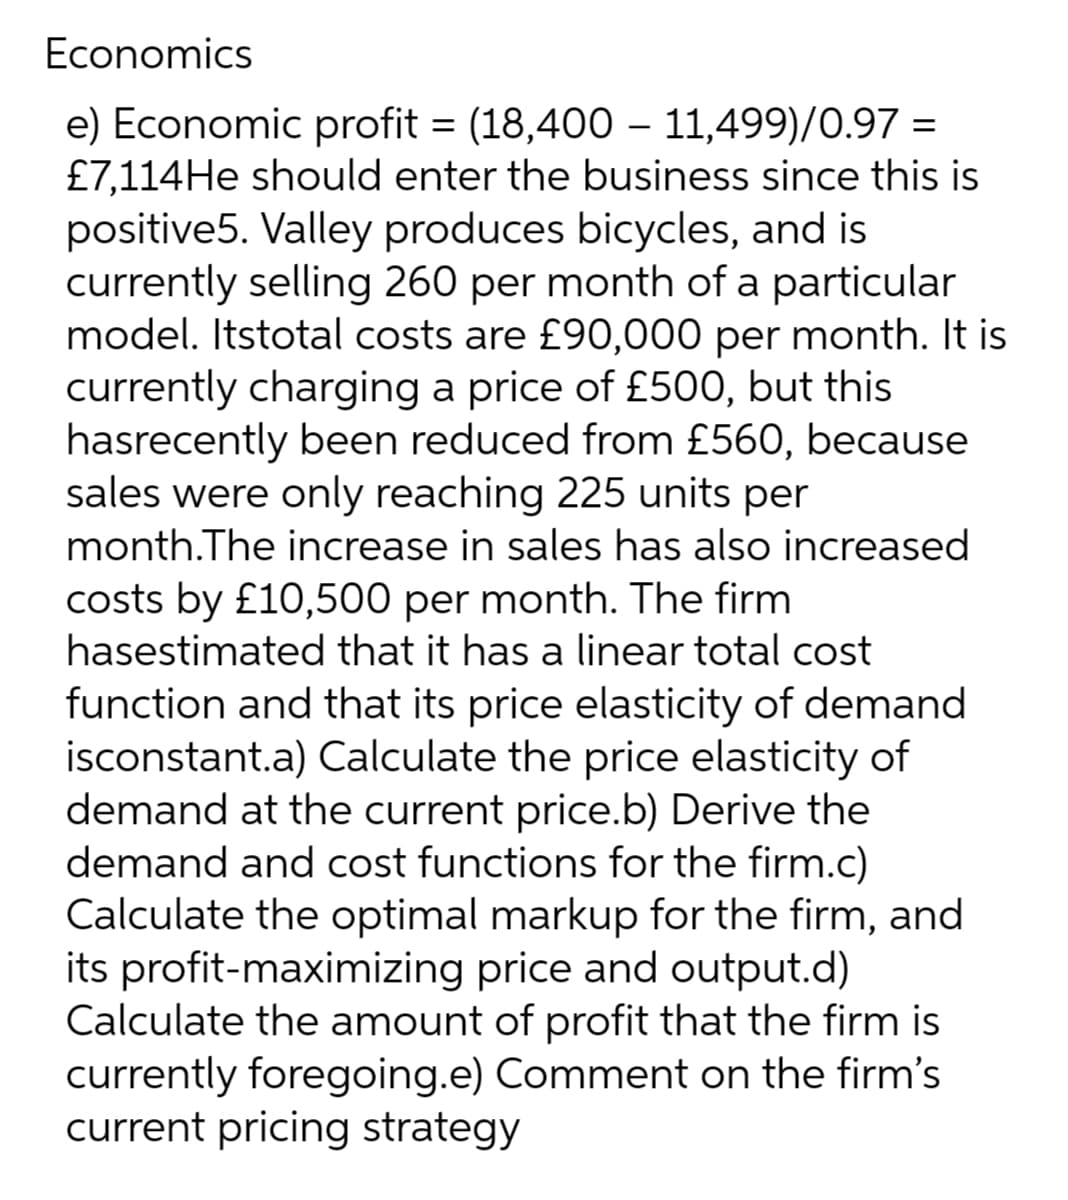 Economics
e) Economic profit= (18,400 - 11,499)/0.97 =
£7,114He should enter the business since this is
positive5. Valley produces bicycles, and is
currently selling 260 per month of a particular
model. Itstotal costs are £90,000 per month. It is
currently charging a price of £500, but this
hasrecently been reduced from £560, because
sales were only reaching 225 units per
month.The increase in sales has also increased
costs by £10,500 per month. The firm
hasestimated that it has a linear total cost
function and that its price elasticity of demand
isconstant.a) Calculate the price elasticity of
demand at the current price.b) Derive the
demand and cost functions for the firm.c)
Calculate the optimal markup for the firm, and
its profit-maximizing price and output.d)
Calculate the amount of profit that the firm is
currently foregoing.e) Comment on the firm's
current pricing strategy